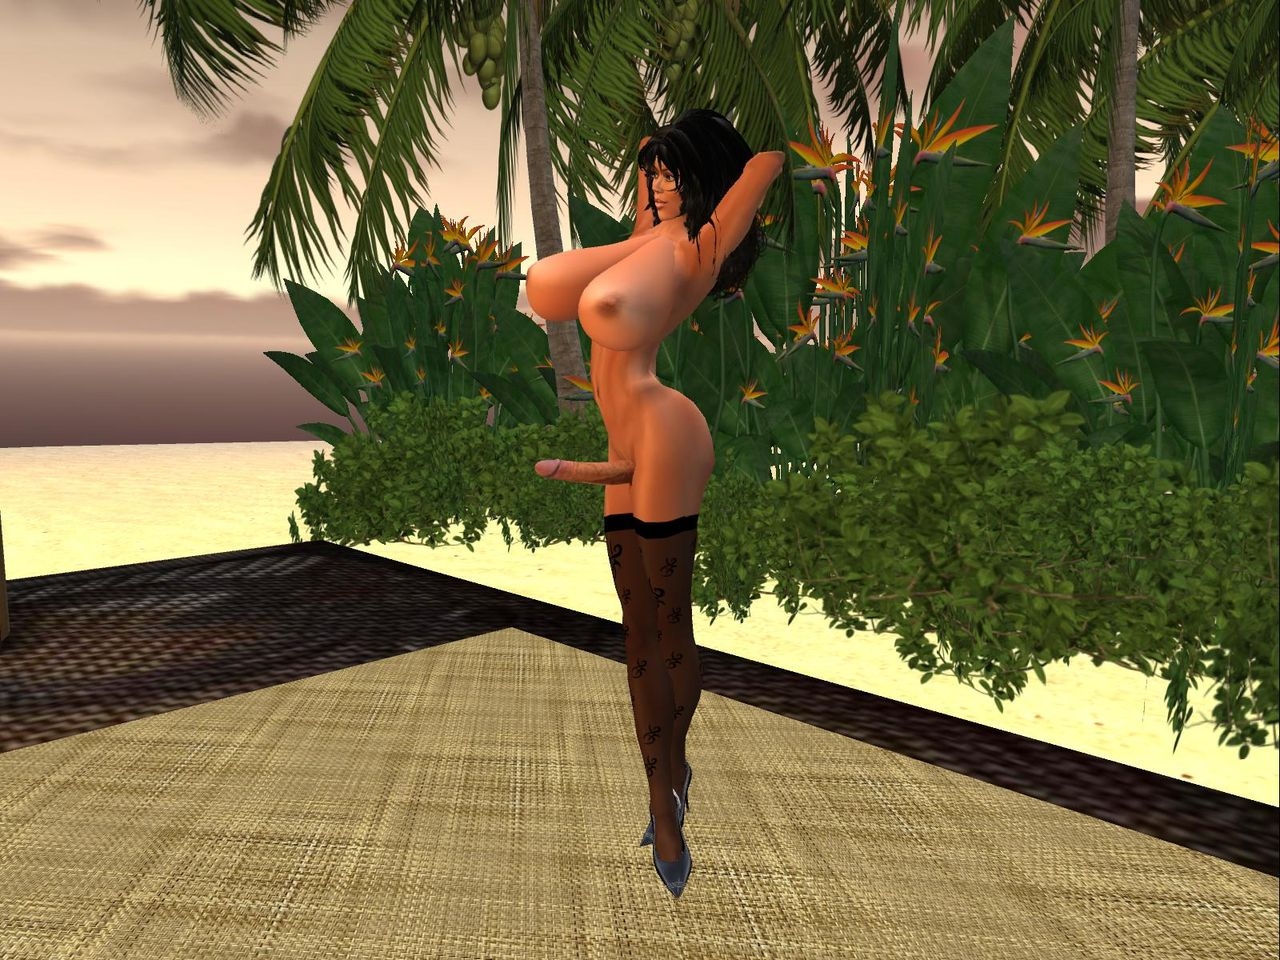 Shemale Luvi poses in Second Life 12